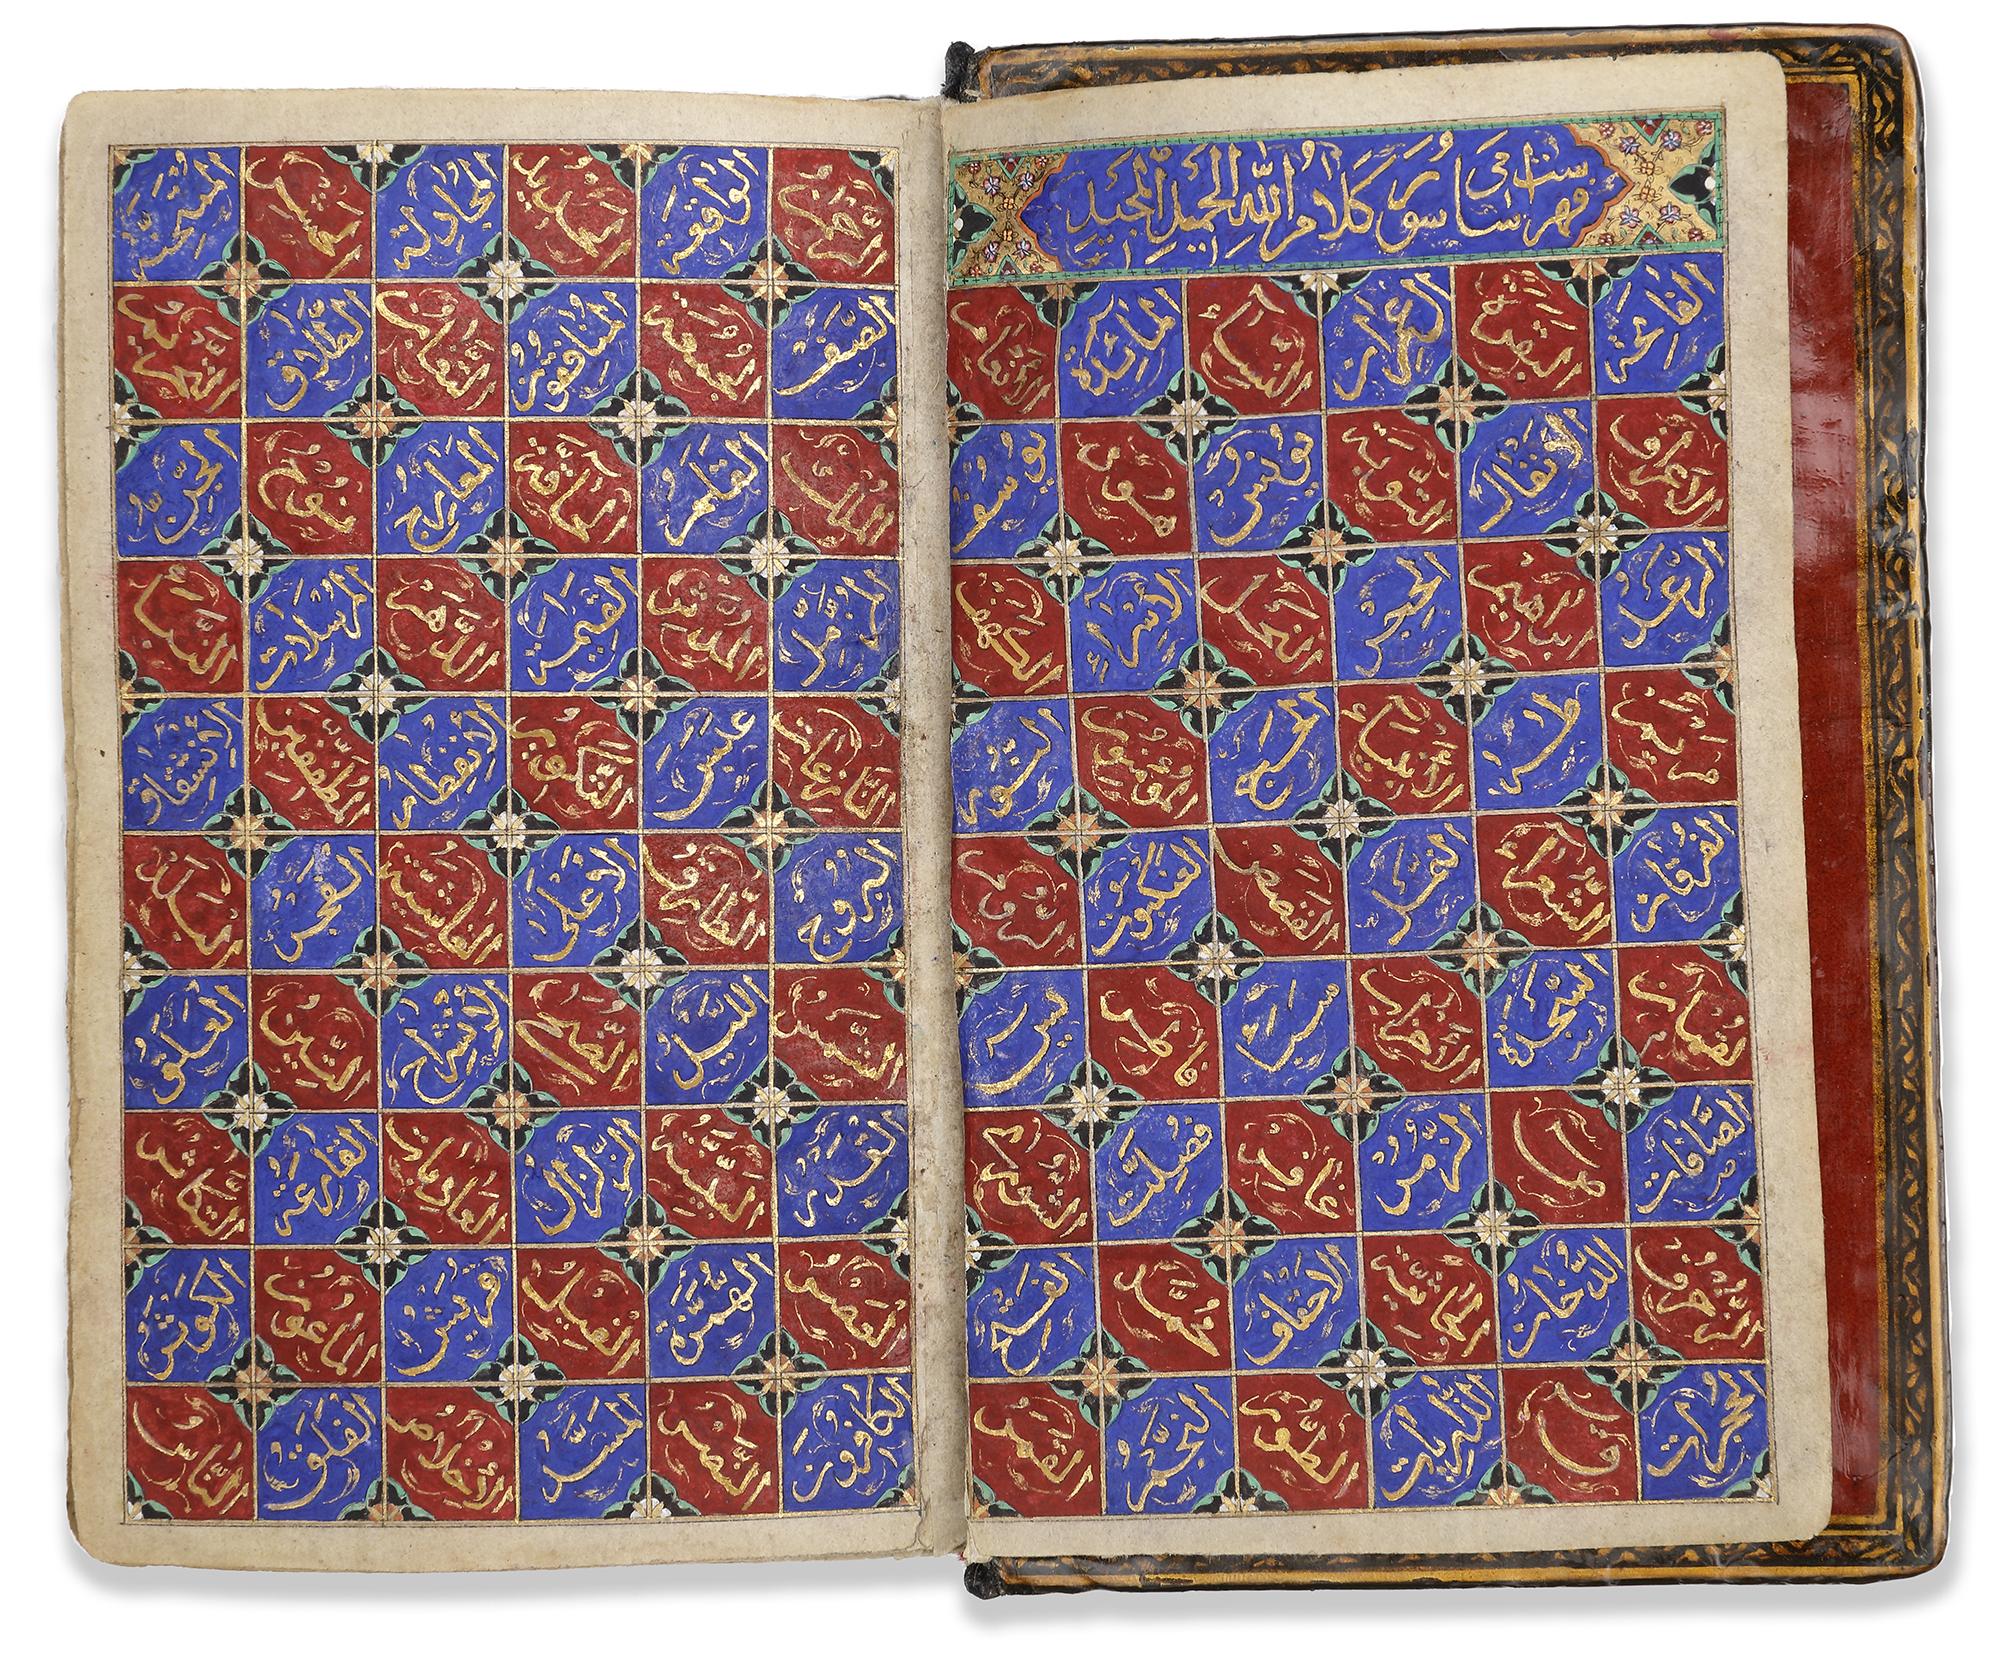 AN ILLUMINATED QAJAR QURAN BY ISMAIL IN 1244 AH/1828 AD - Image 2 of 6